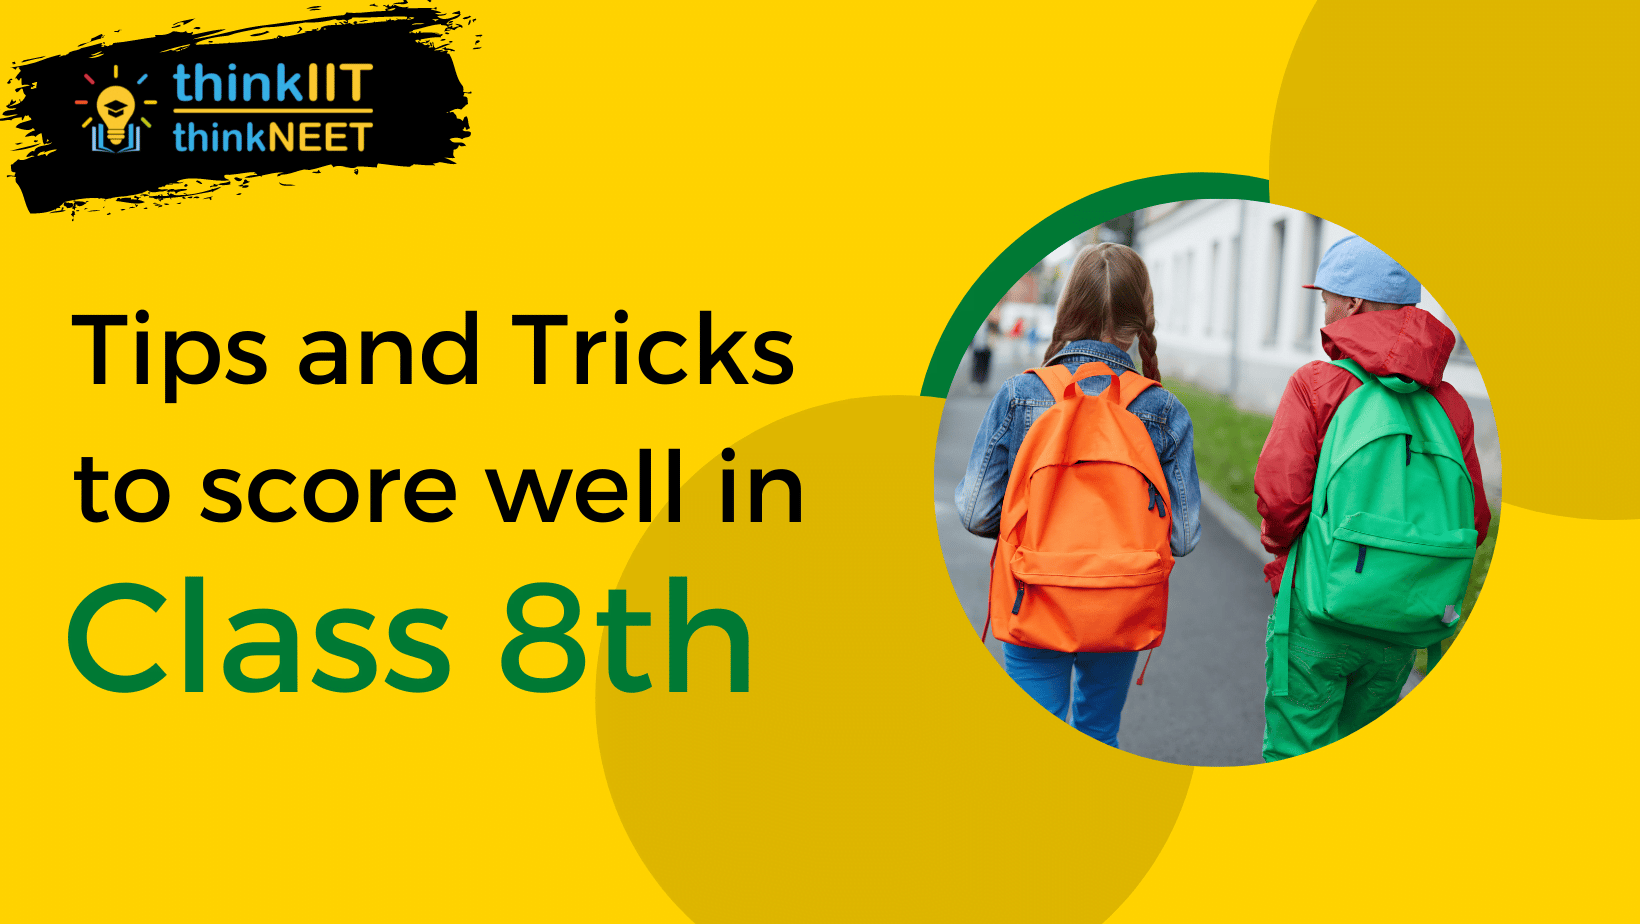 Tips and Tricks to score well in class 8th